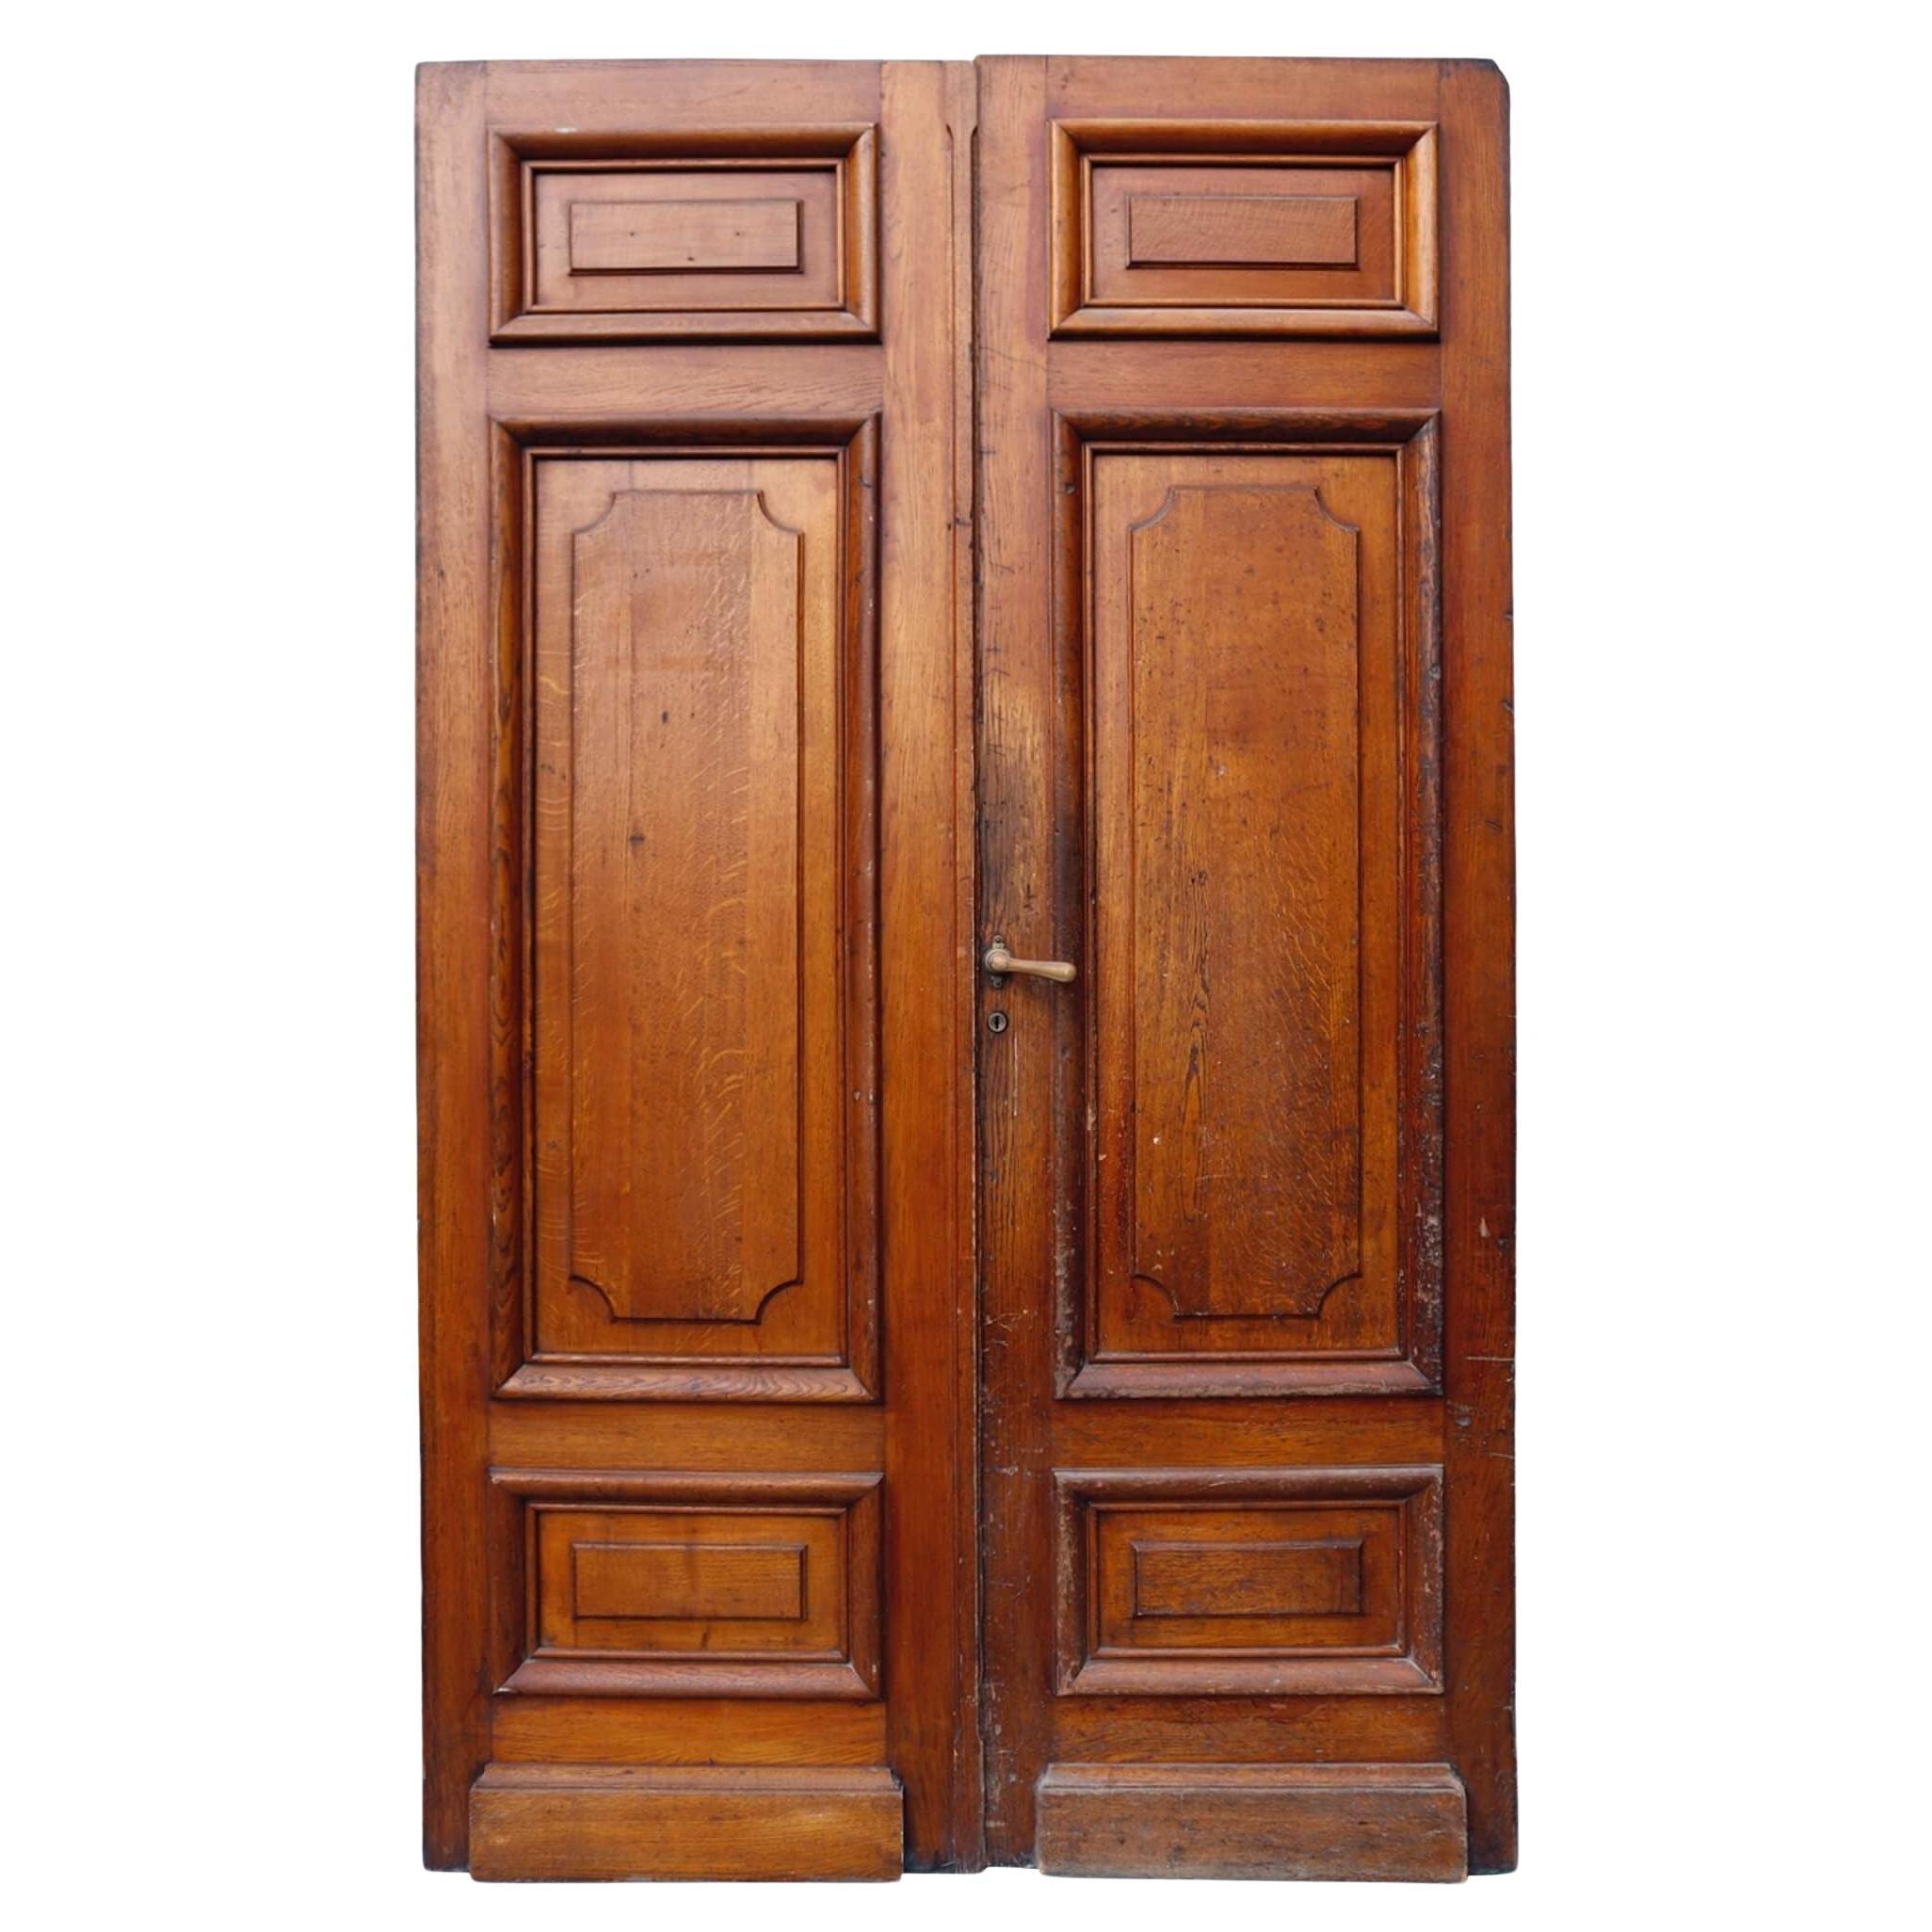 Set of Tall Louis Style French Oak Double Doors